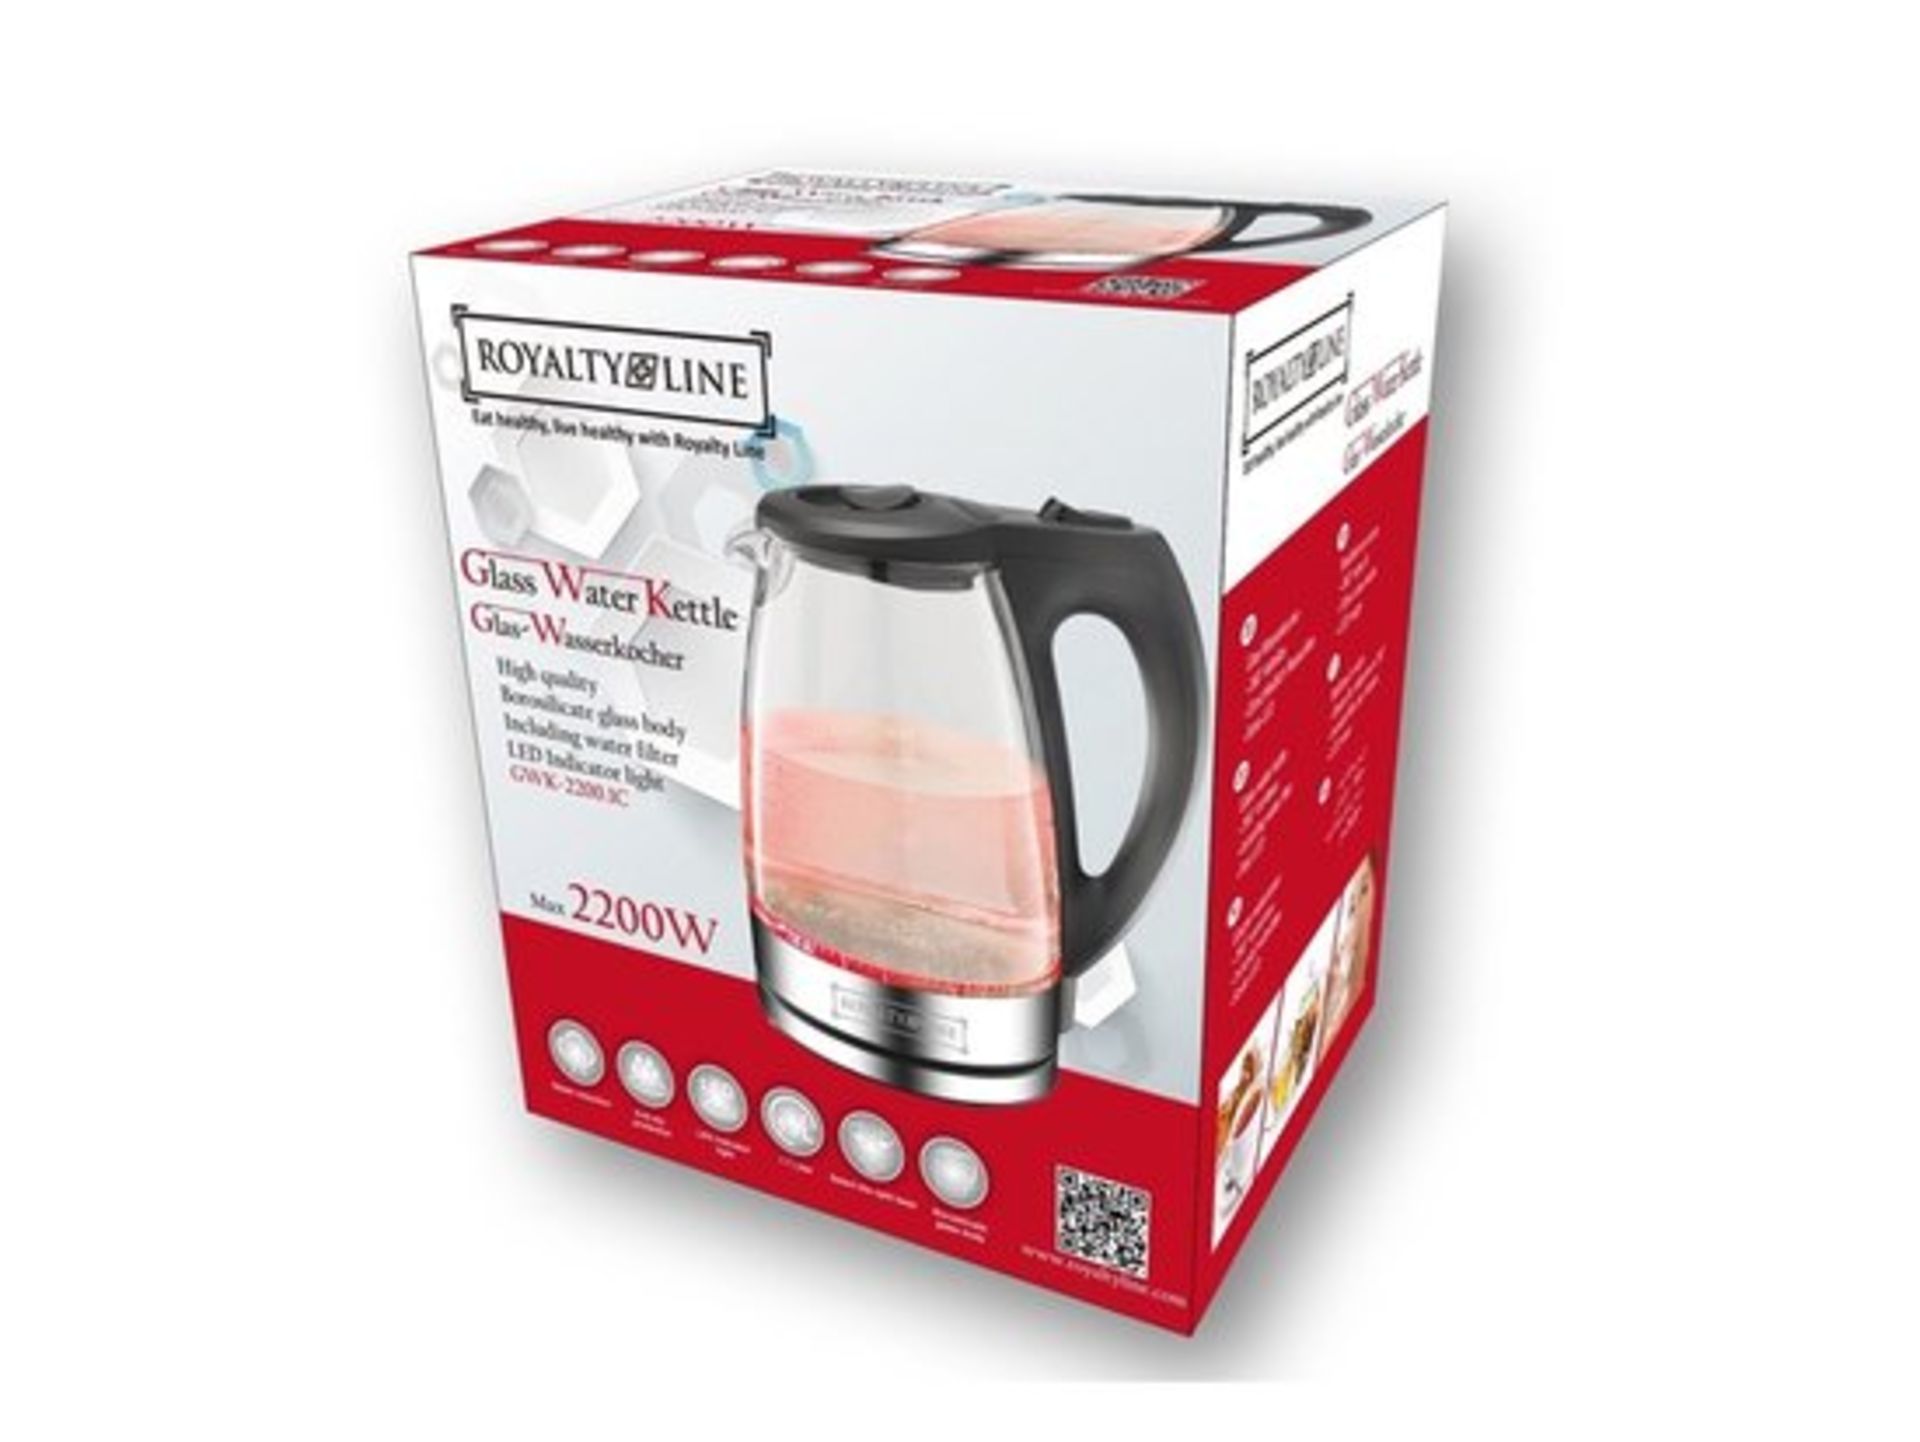 V Brand New Royalty Line Glass Water Kettle With Biosilicate Glass Body & Water Filter Colour May